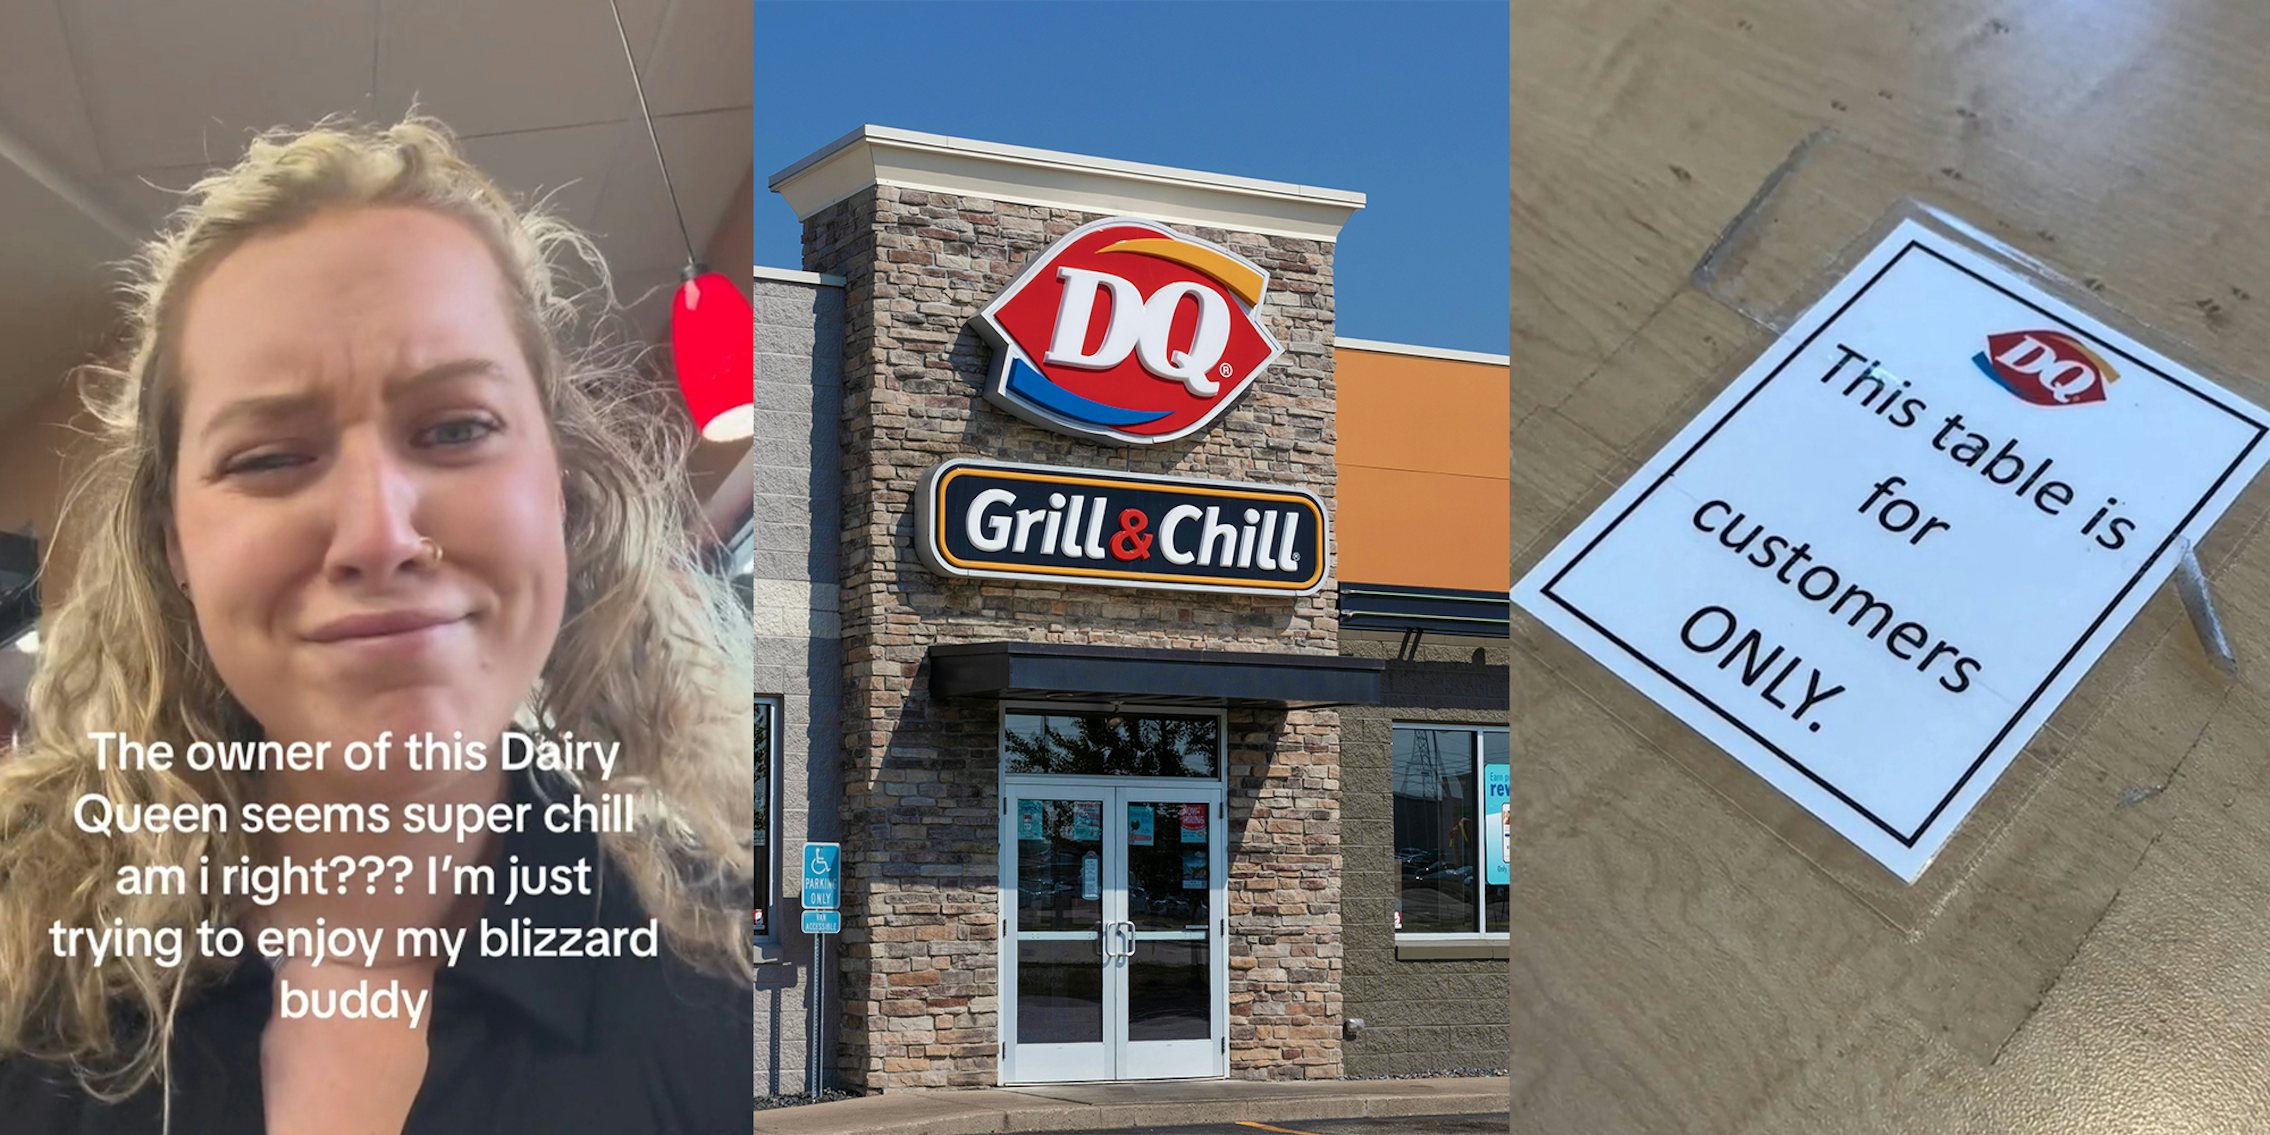 Customer shows local Dairy Queen store plastered with rules